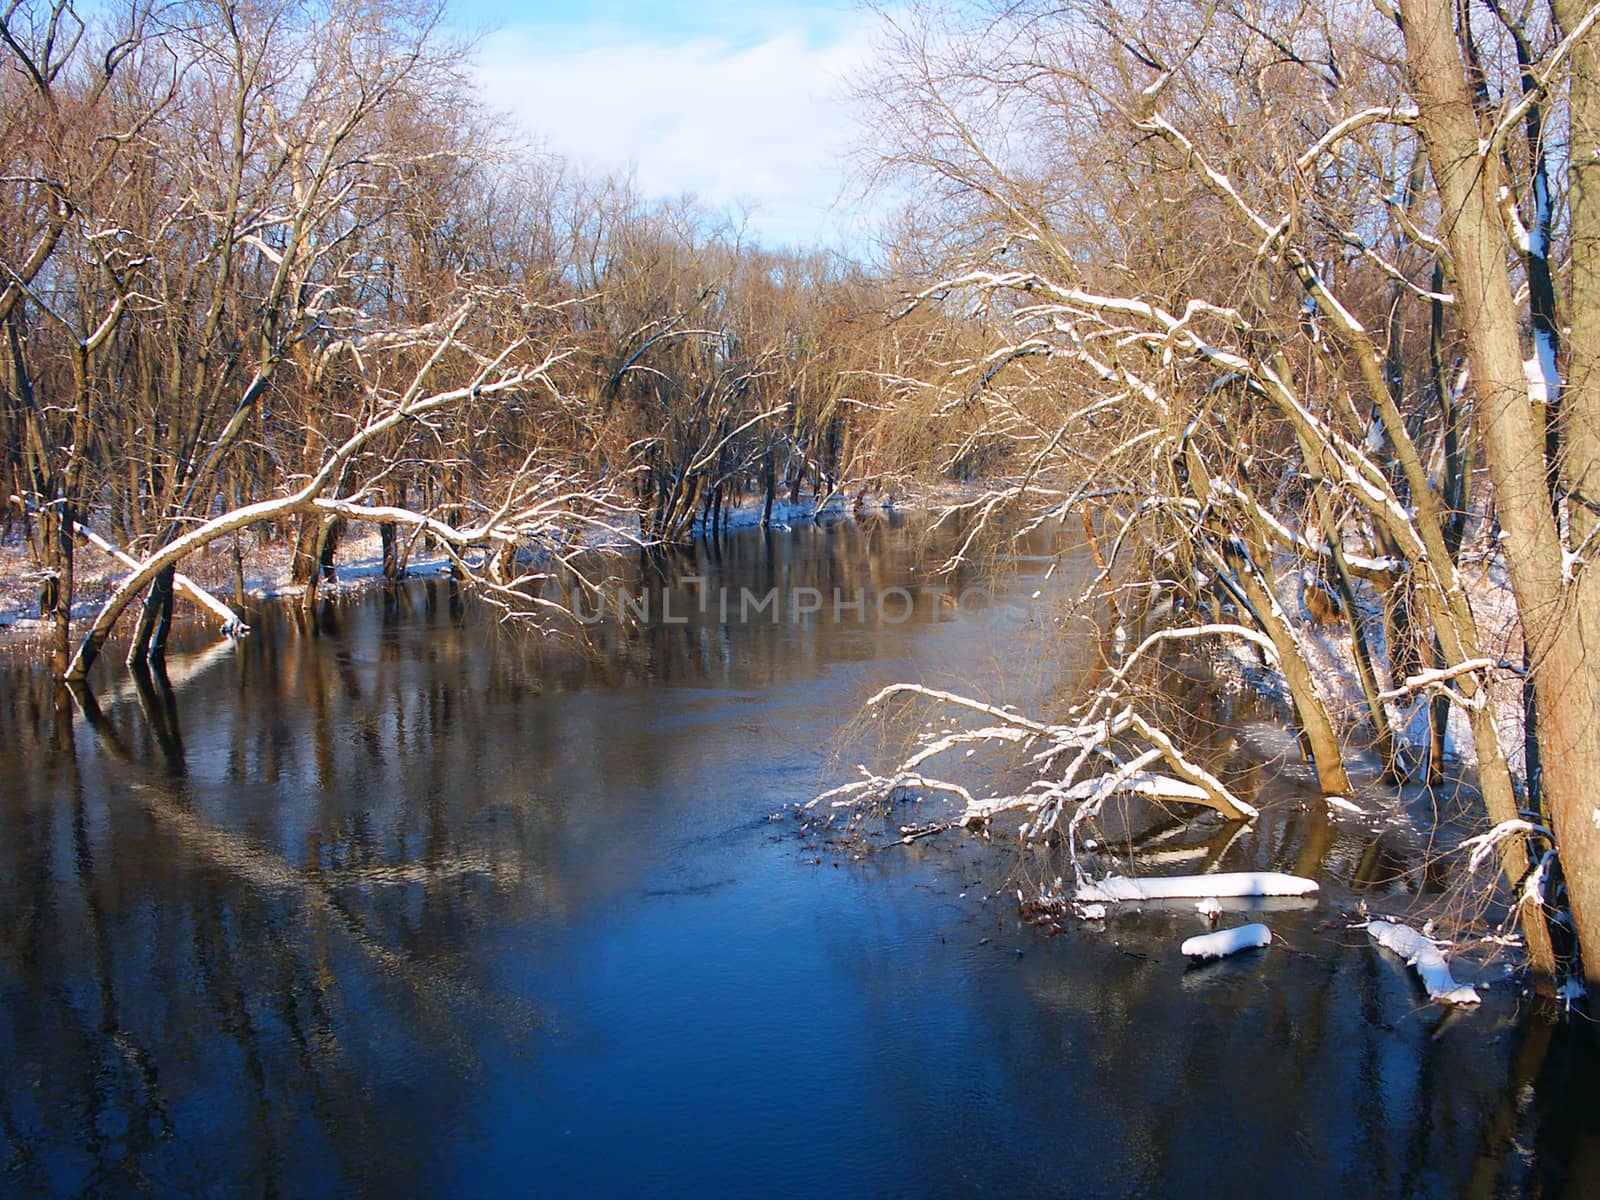 Sangamon River in central Illinois by Wirepec